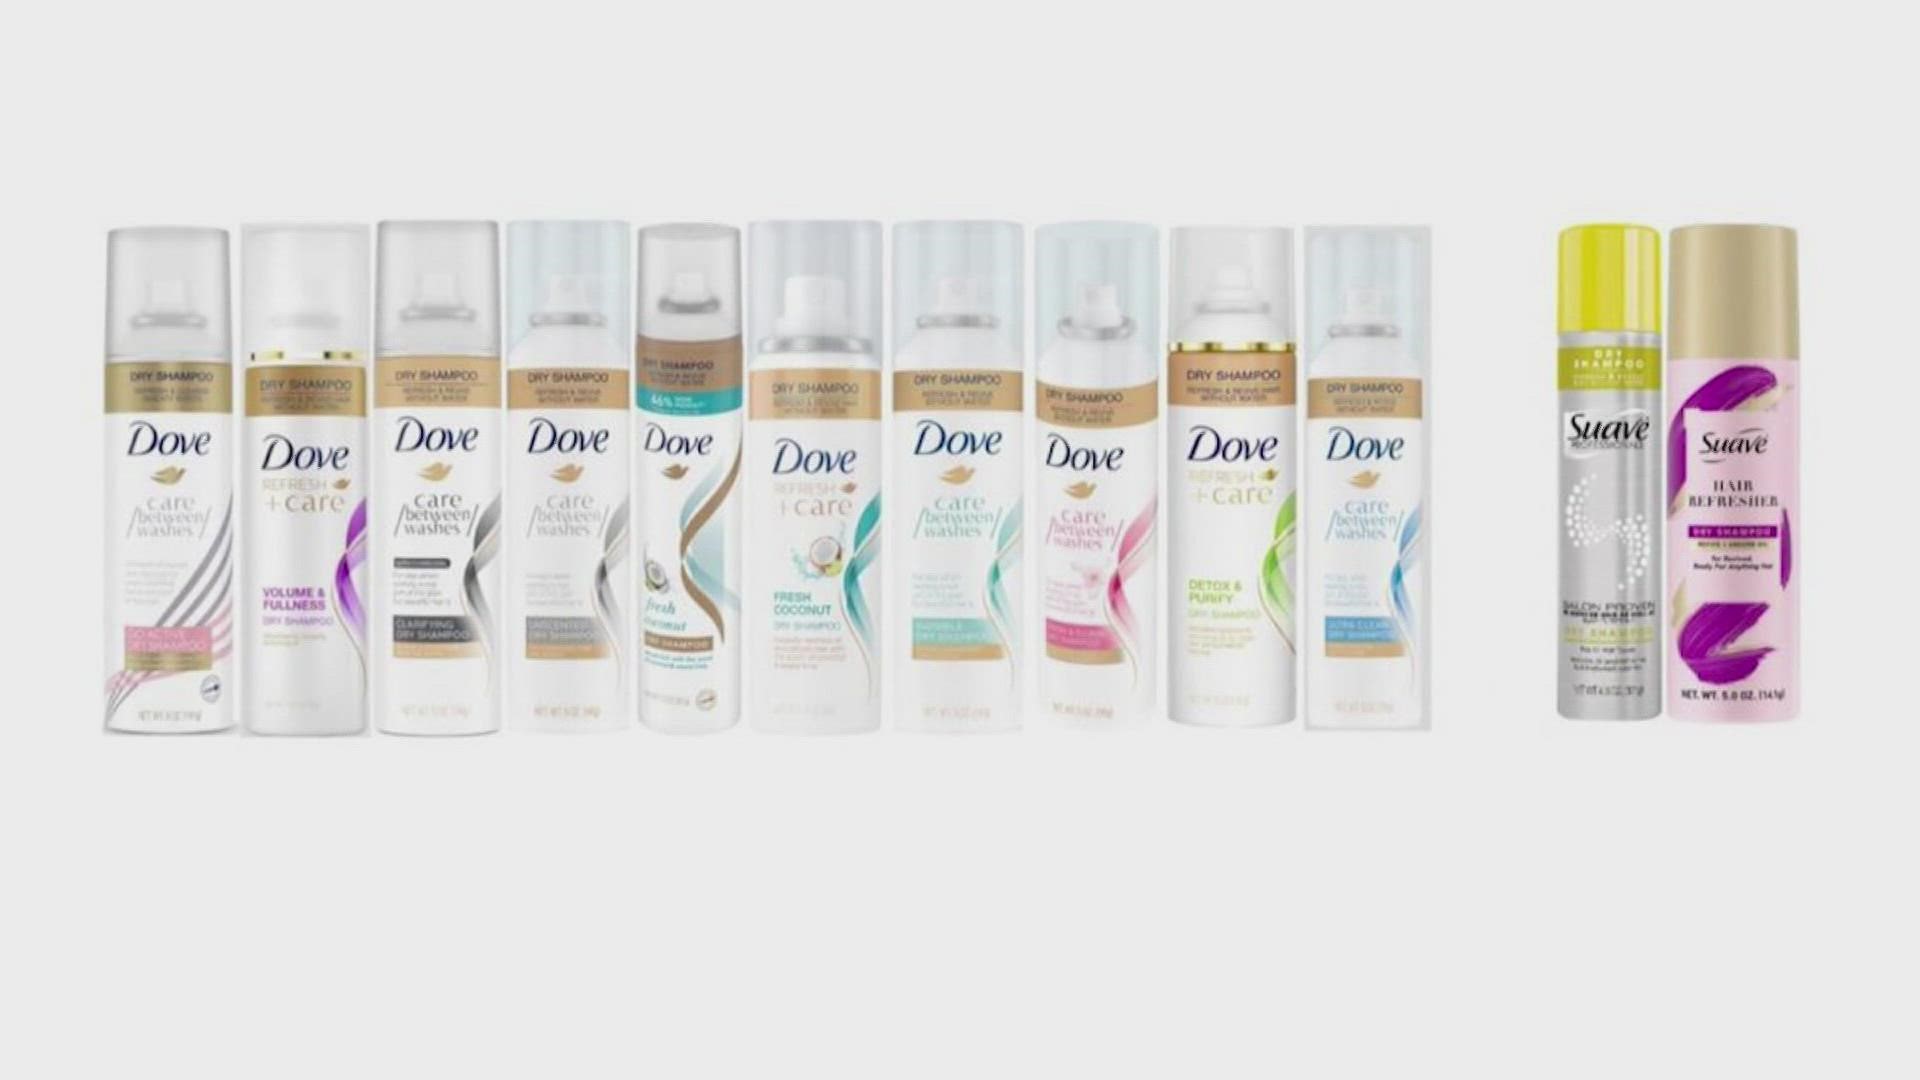 Lab klimaks annoncere Unilever dry shampoo recall: Dove, Bed Head, Suave on 2022 list | king5.com